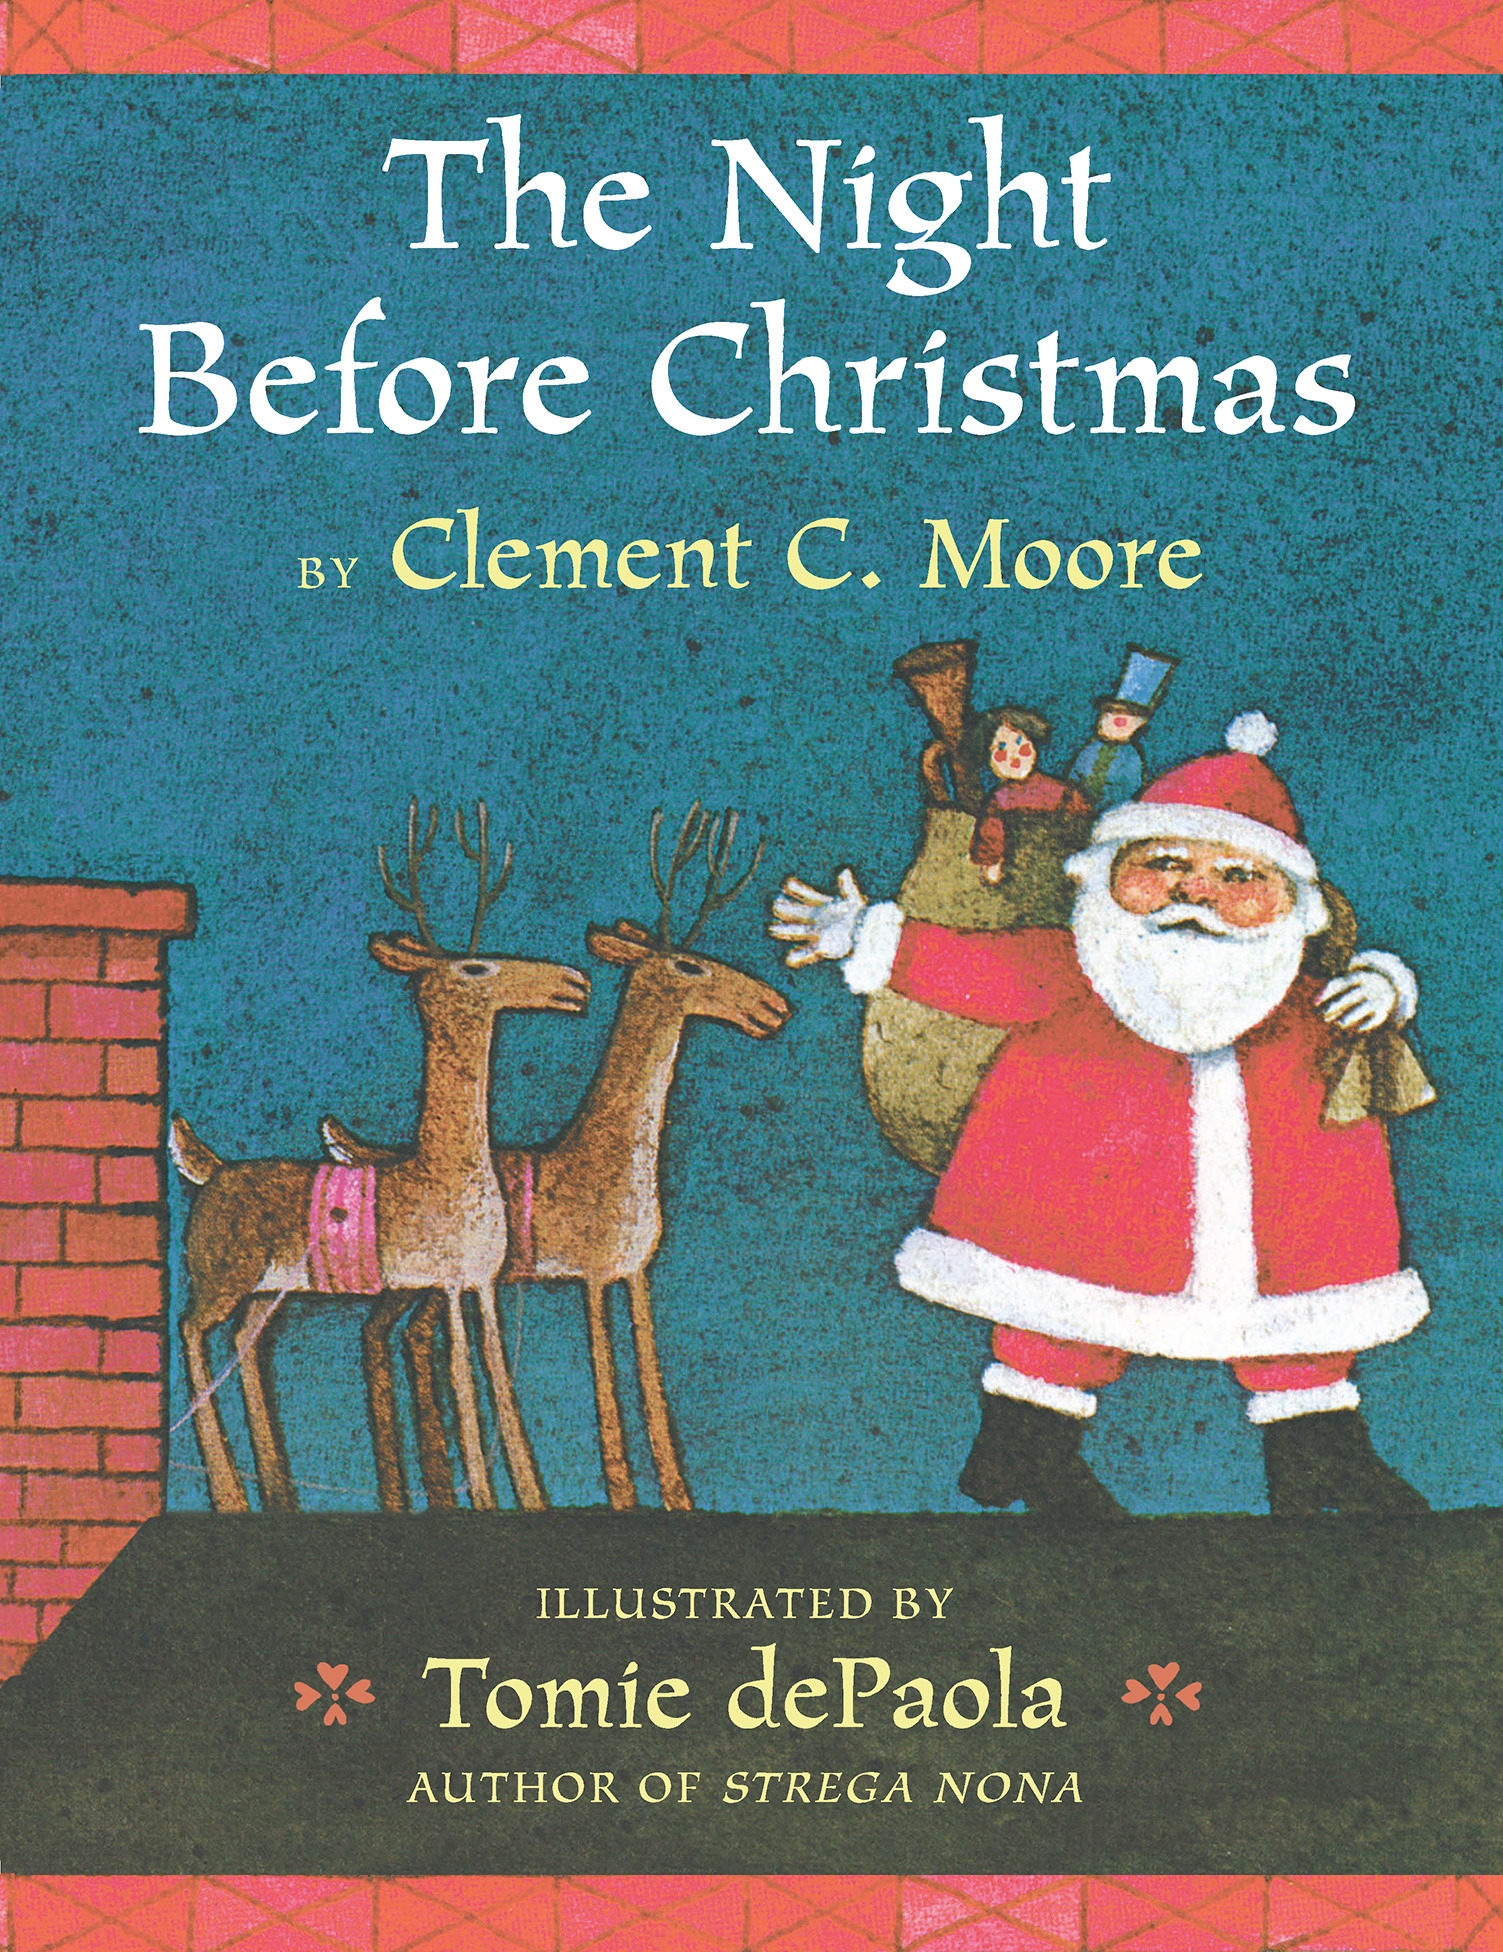 The Night Before Christmas by Clement C. Moore Penguin Books Australia